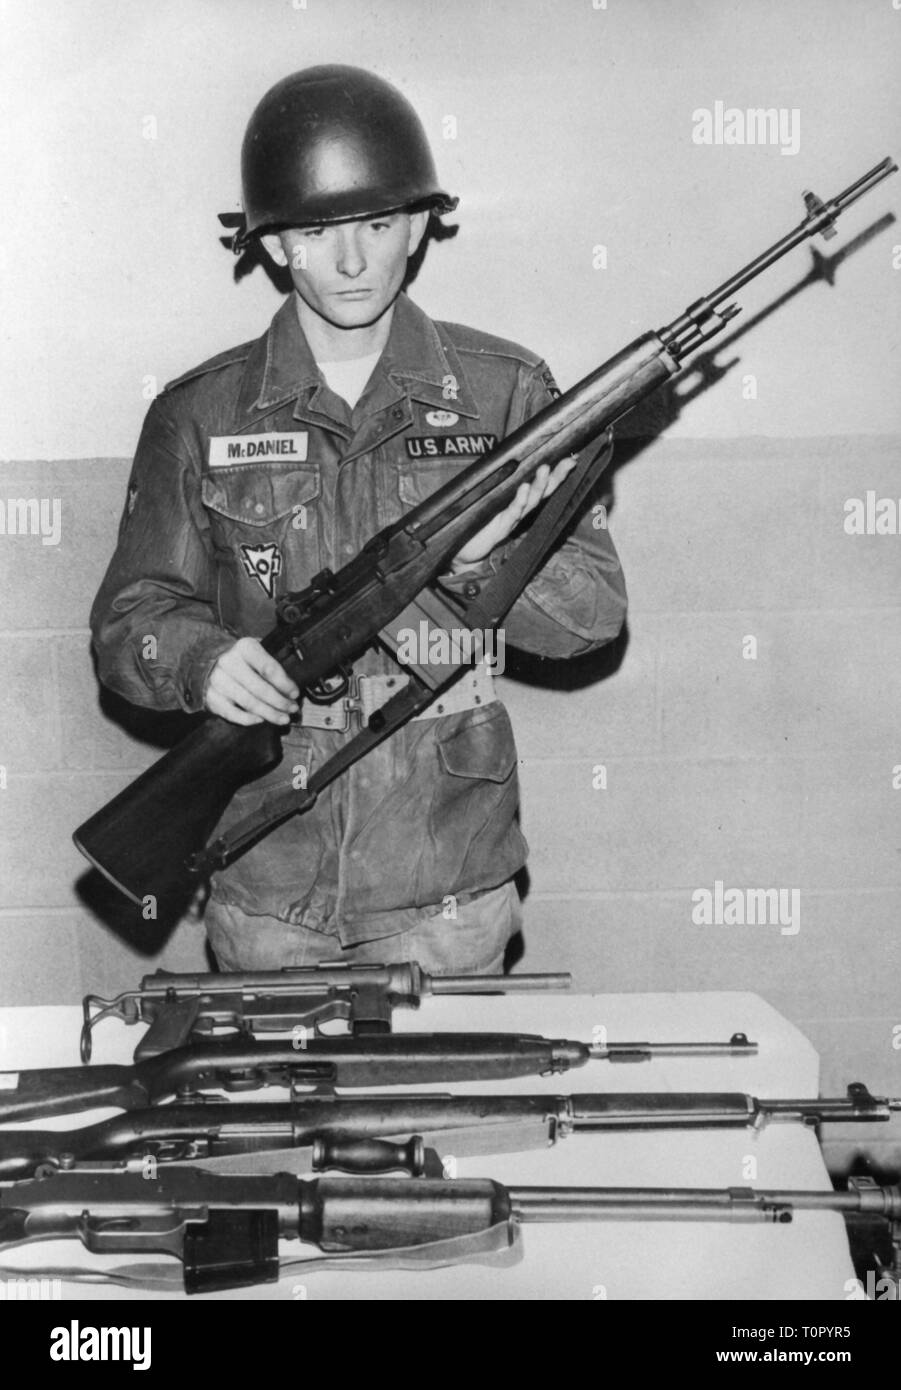 military, USA, army, weapons, soldier with the new M14 rifle, 28.4.1960, automatic rifle, M-14, M 14, sub-machine gun M3 Grease Gun, M-3, M 3, M1 Garand, M-1, M 1, M1918 Browning Automatic Rifle, BAR, M-1918, M 1918, armament, firearm, fire arm, firearms, fire arms, steel helmet, steel helmets, adoption, innovation, innovations, American armed forces, US Army, 1960s, 60s, 20th century, people, man, men, male, USA, United States of America, army, armies, weapons, arms, weapon, arm, soldier, soldiers, rifle, gun, rifles, guns, historic, historical, Additional-Rights-Clearance-Info-Not-Available Stock Photo